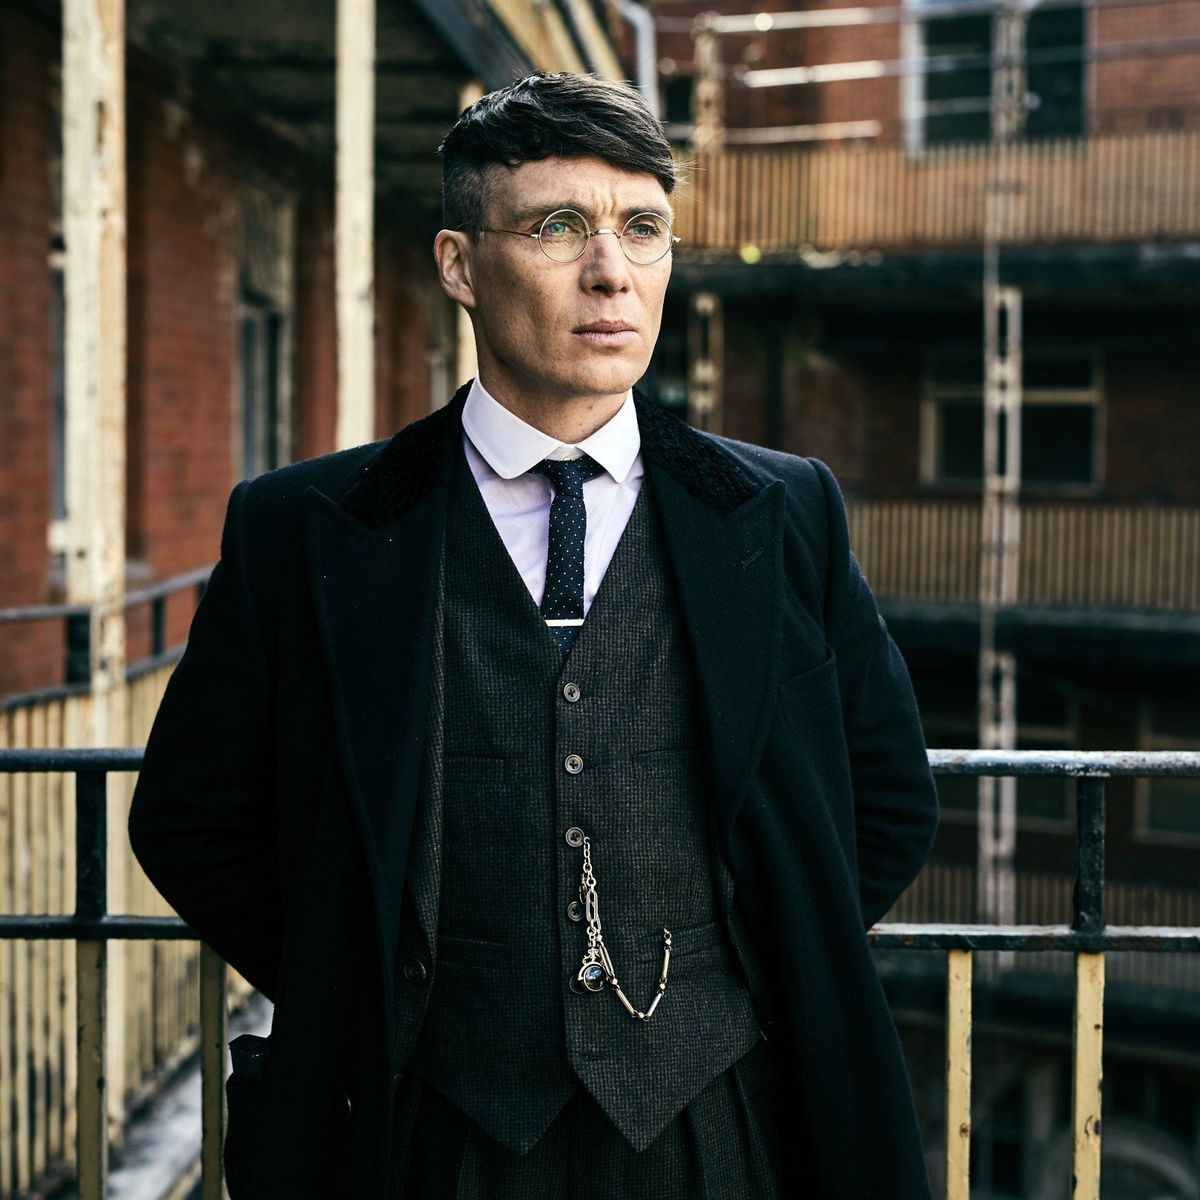 Peaky Blinders Style: How To Get The Look